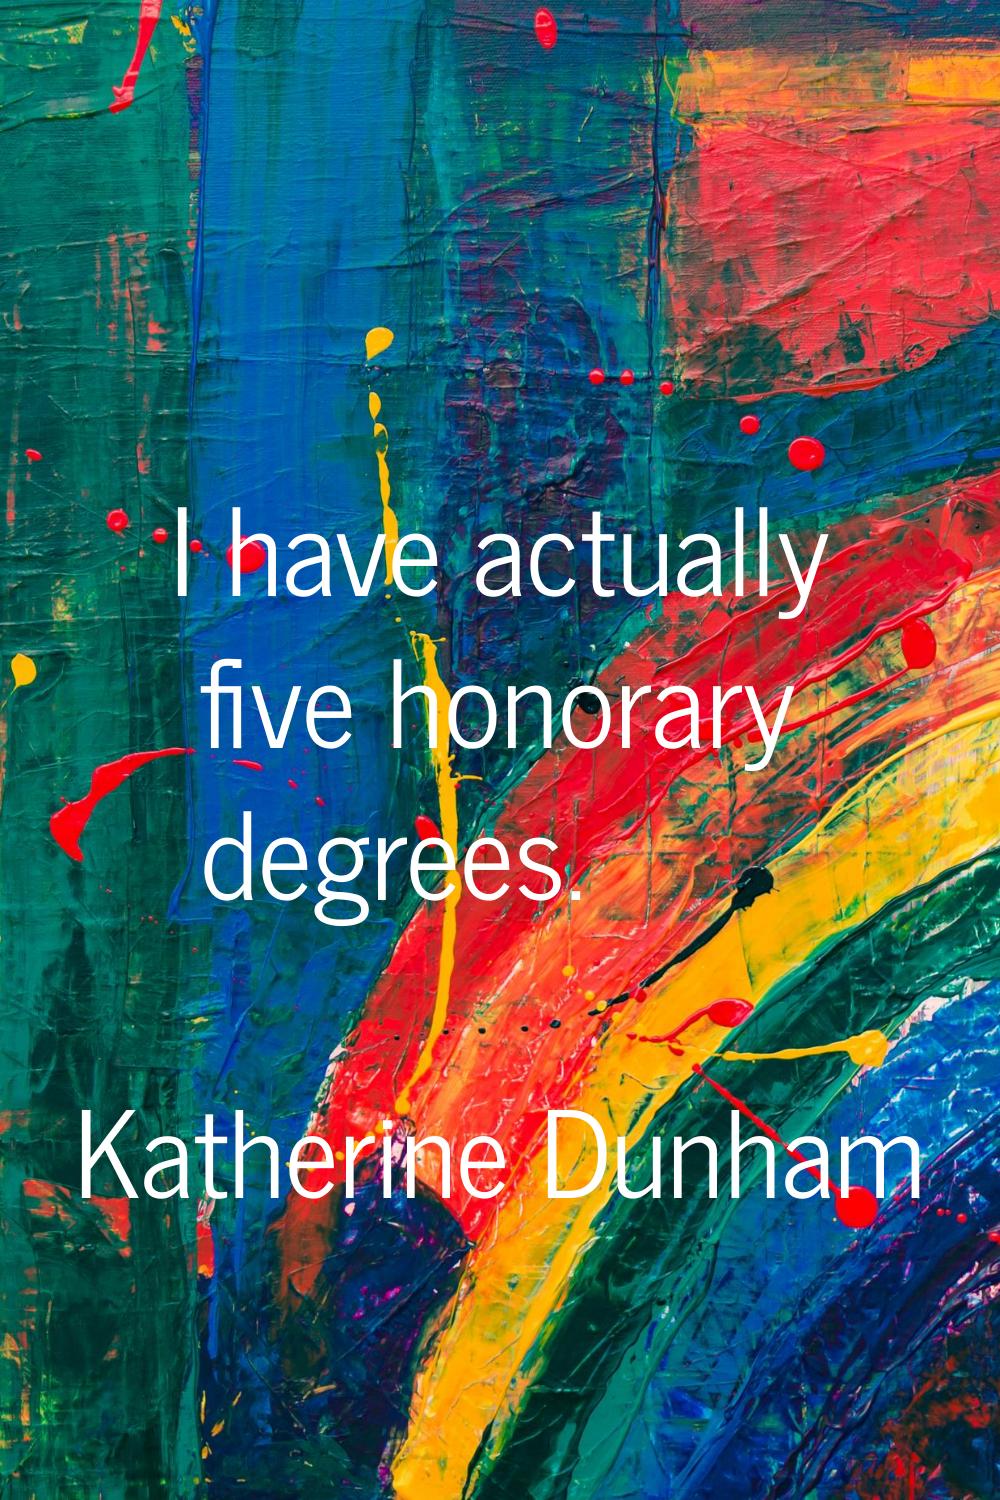 I have actually five honorary degrees.